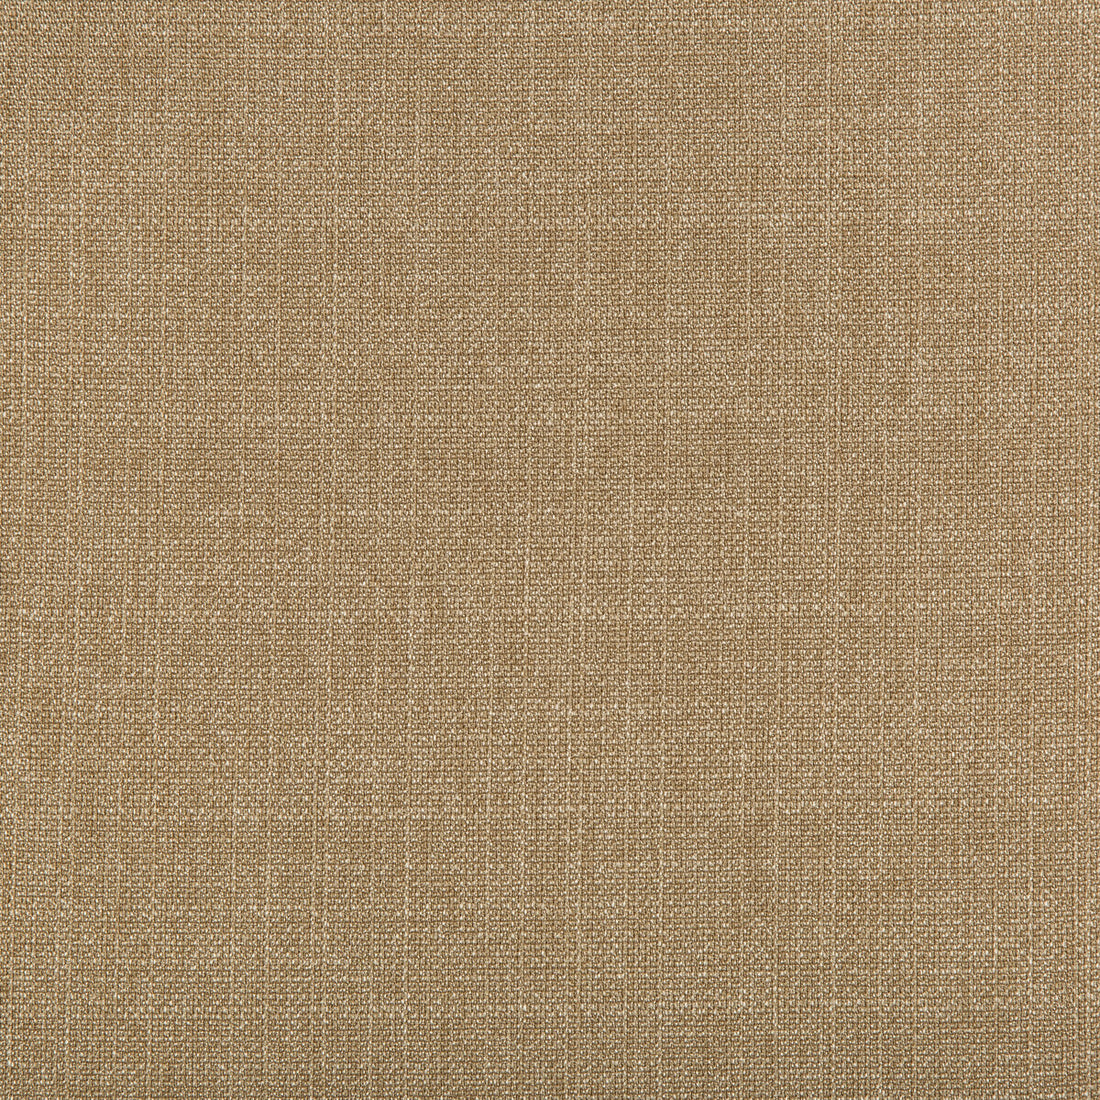 Kravet Contract fabric in 4642-616 color - pattern 4642.616.0 - by Kravet Contract